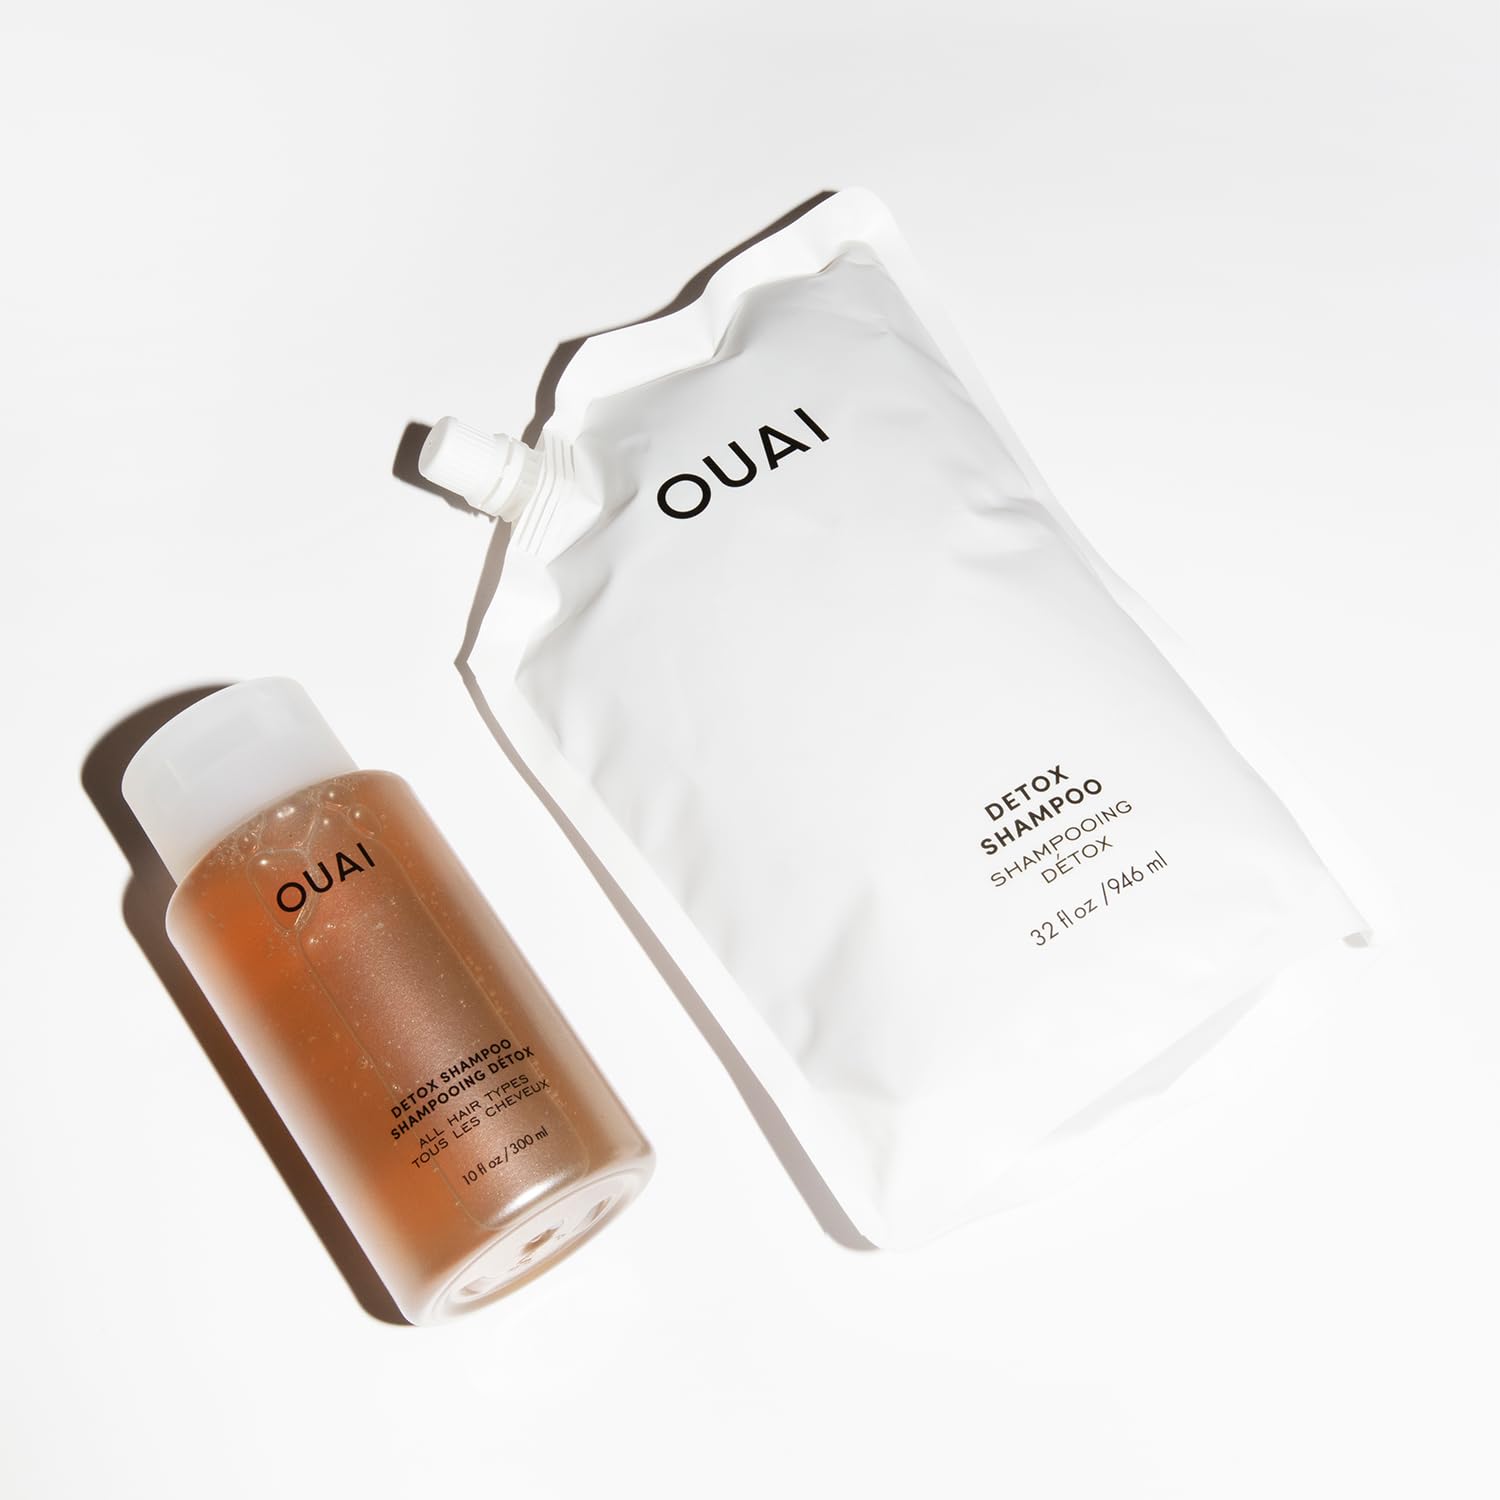 OUAI Detox Shampoo Refill - Clarifying Shampoo for Build Up, Dirt, Oil, Product and Hard Water - Apple Cider Vinegar & Keratin for Clean, Refreshed Hair - Sulfate-Free Hair Care (32 oz) : Beauty & Personal Care